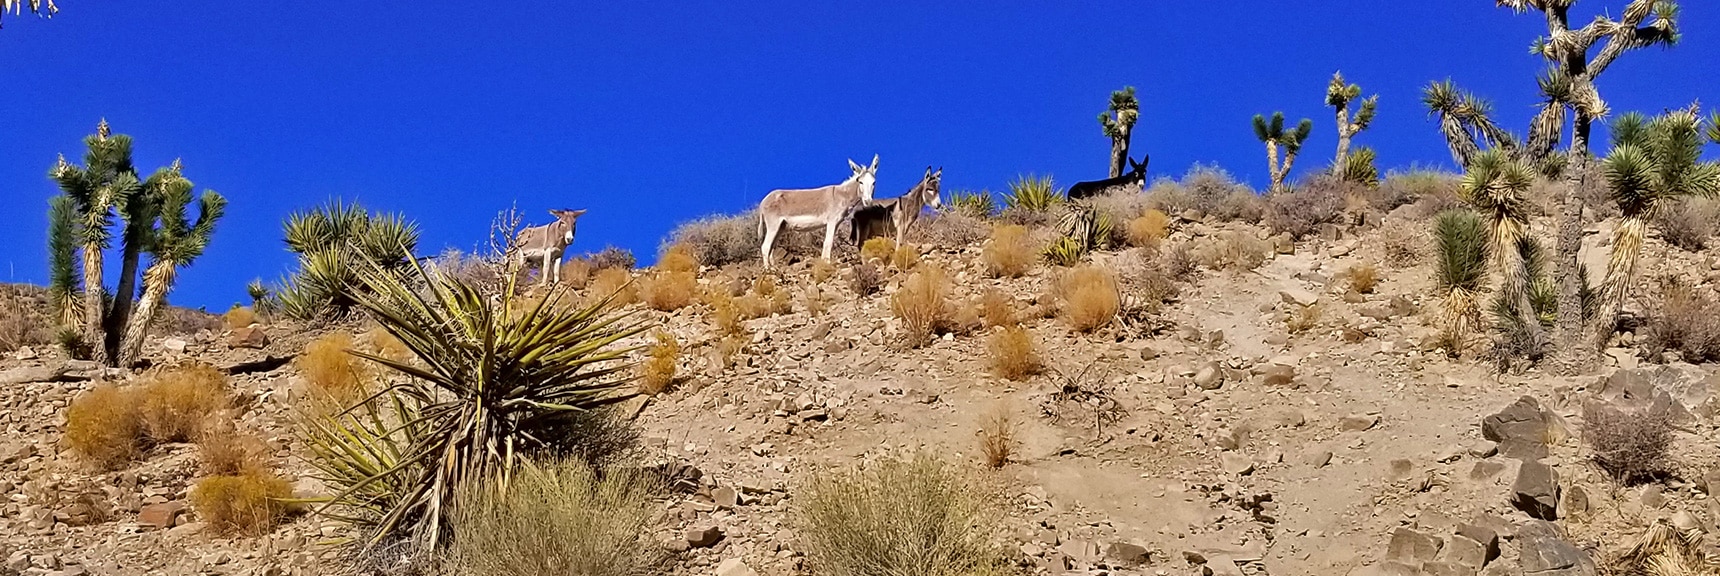 Wild Burros on Lucky Strike Road Past Goldwater Canyon | Angel Peak via Lucky Strike Road | Mt Charleston Wilderness | Spring Mountains, Nevada